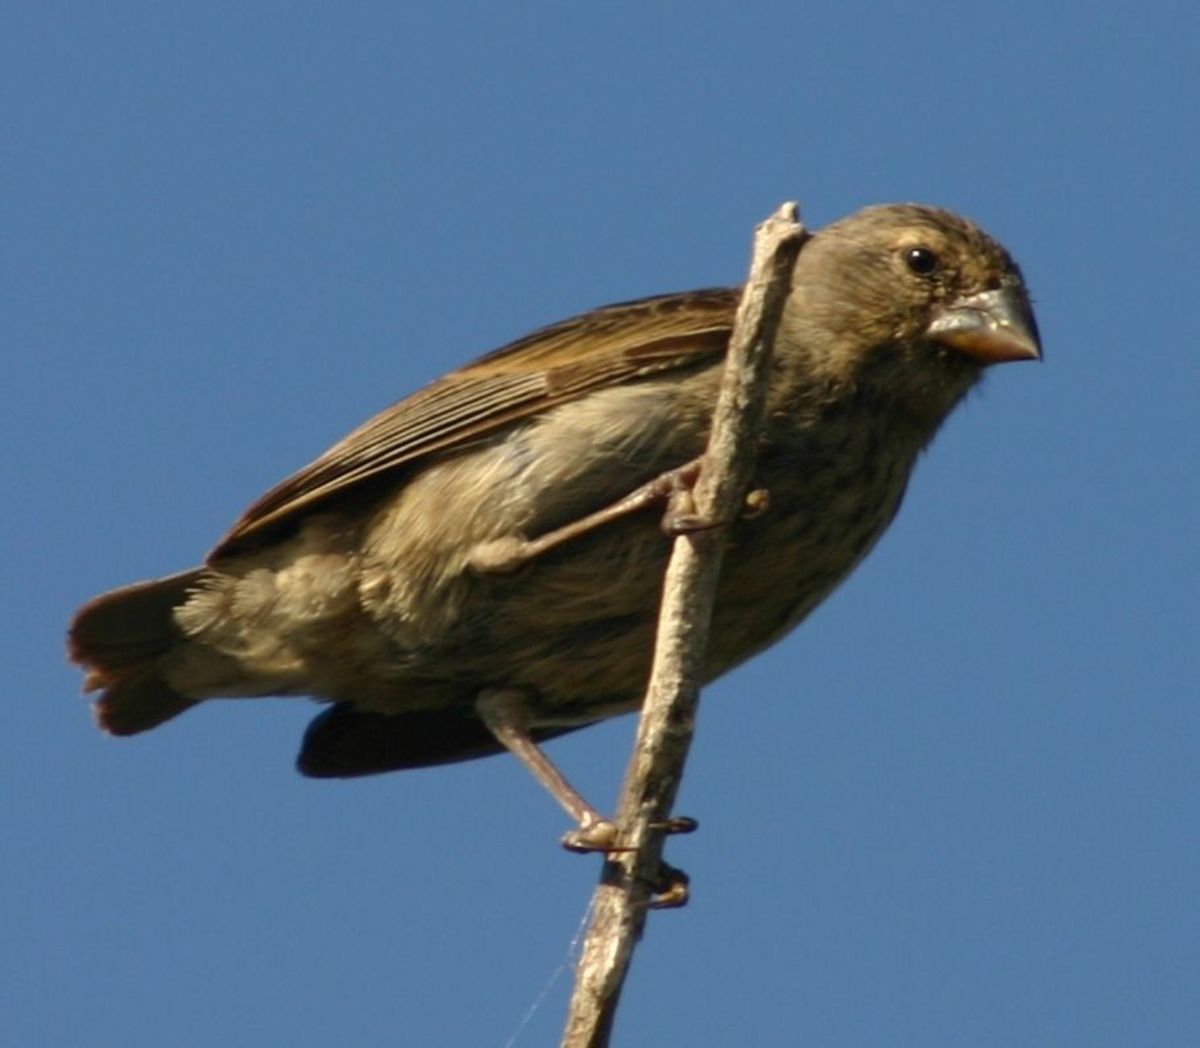 Darwin's study of finches on the Galapagos Islands is what led him to discover Evolution through Natural Selection. 